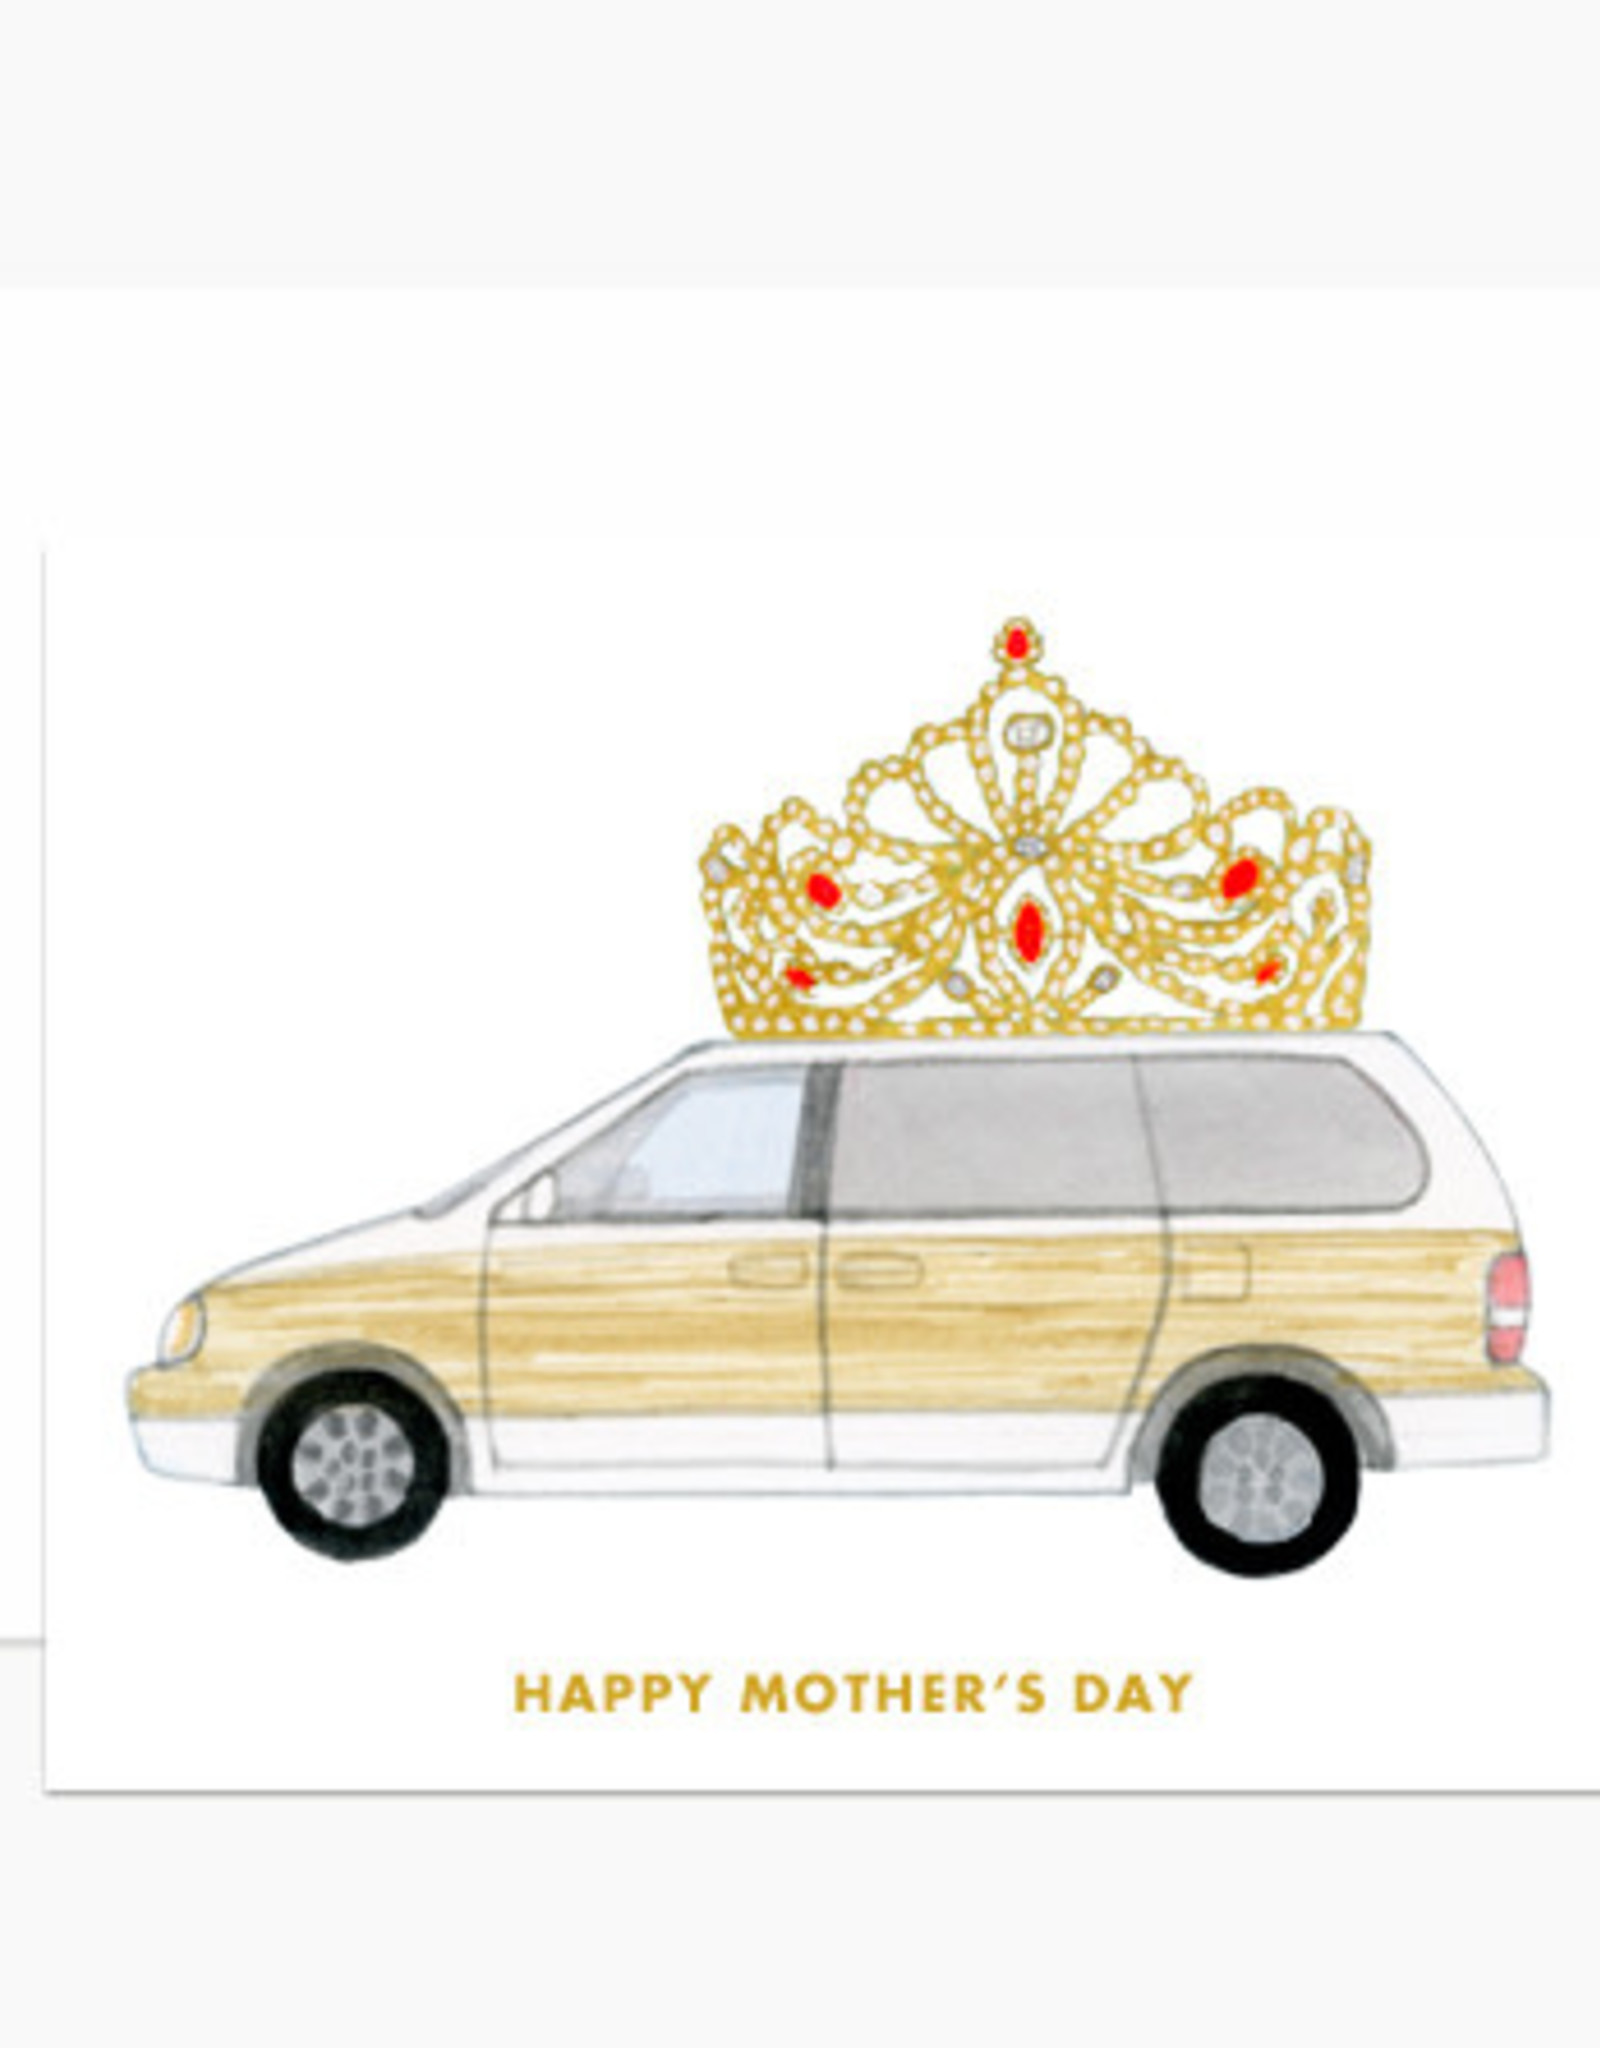 Queen of the Road Greeting Card